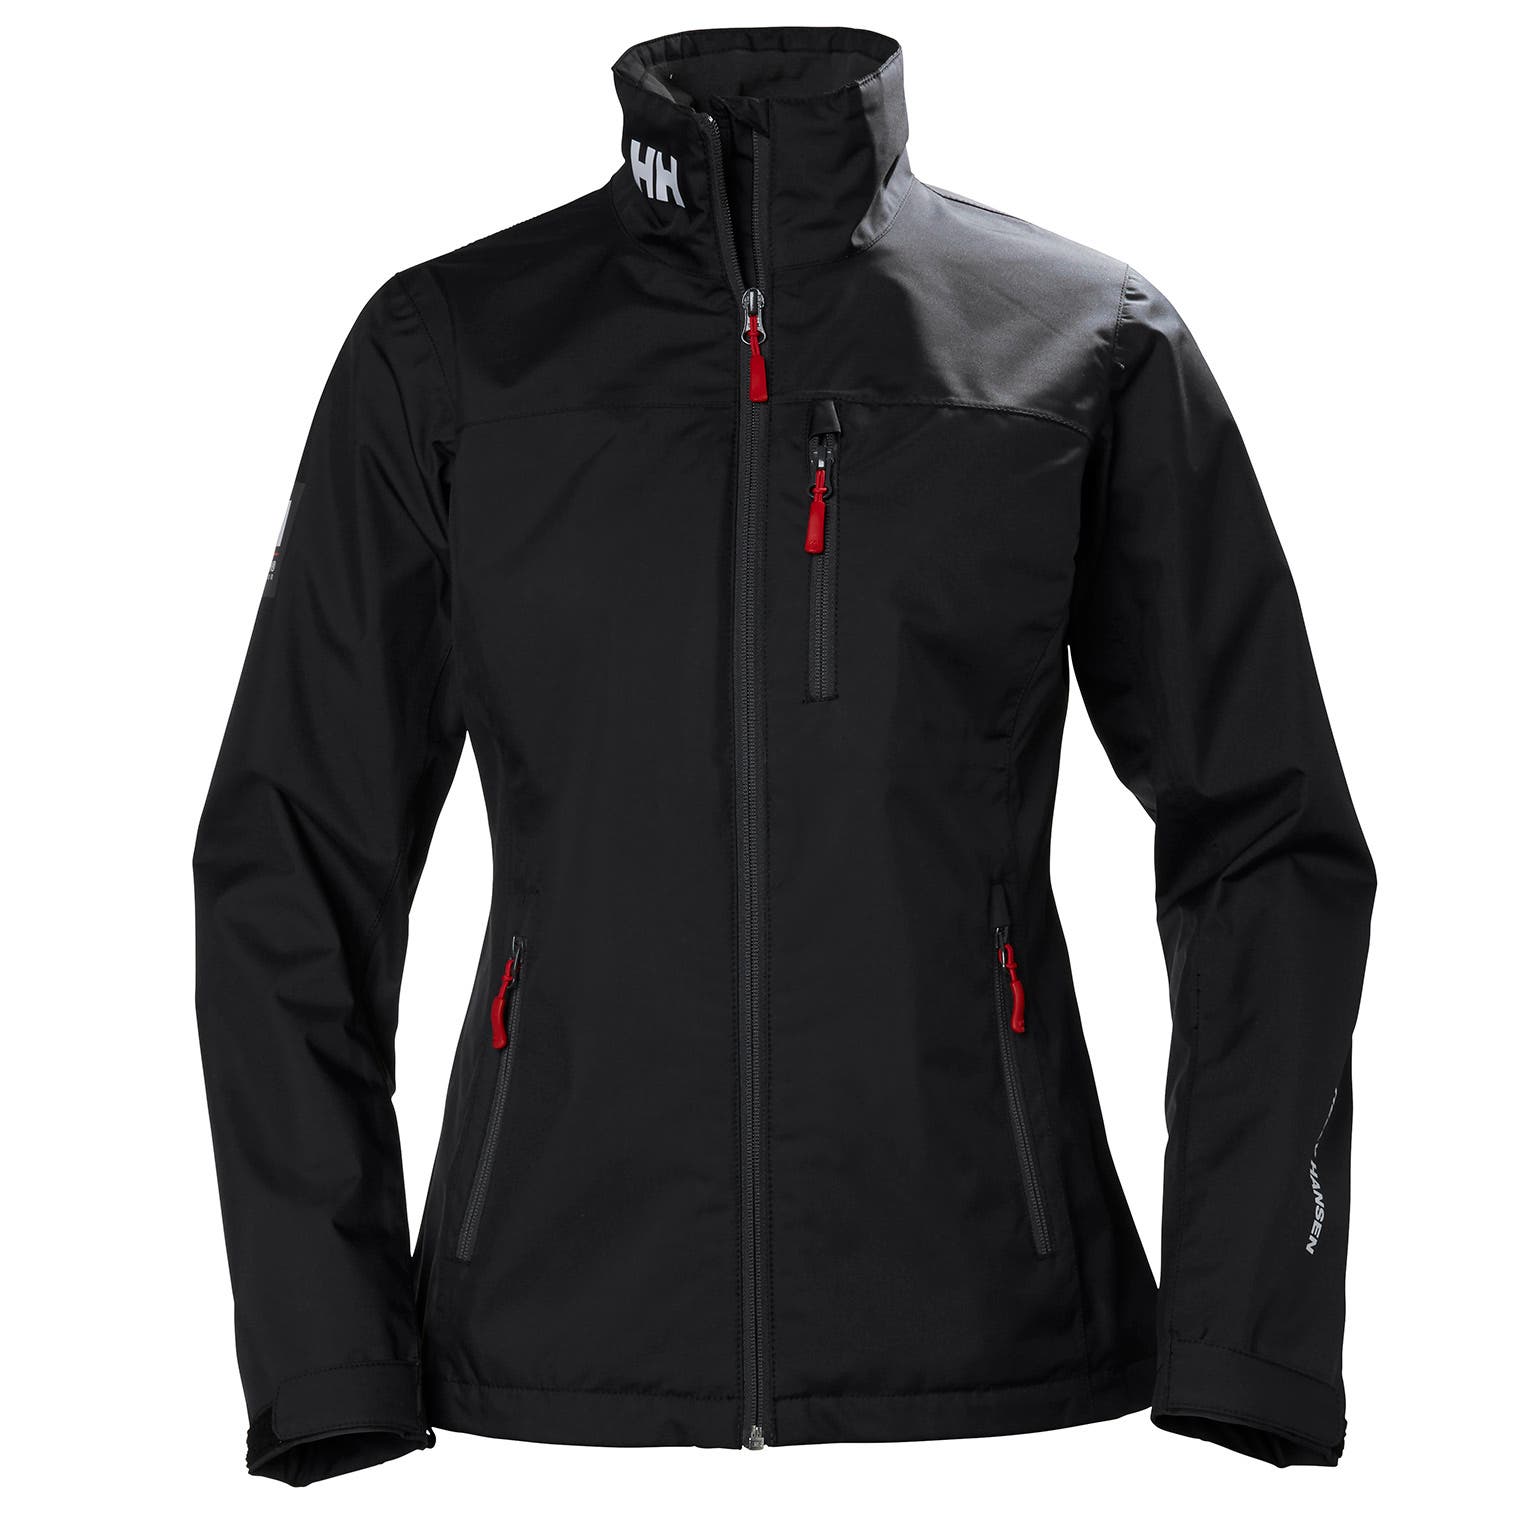 Helly Hansen Women's Crew Midlayer Jacket in Black from the front